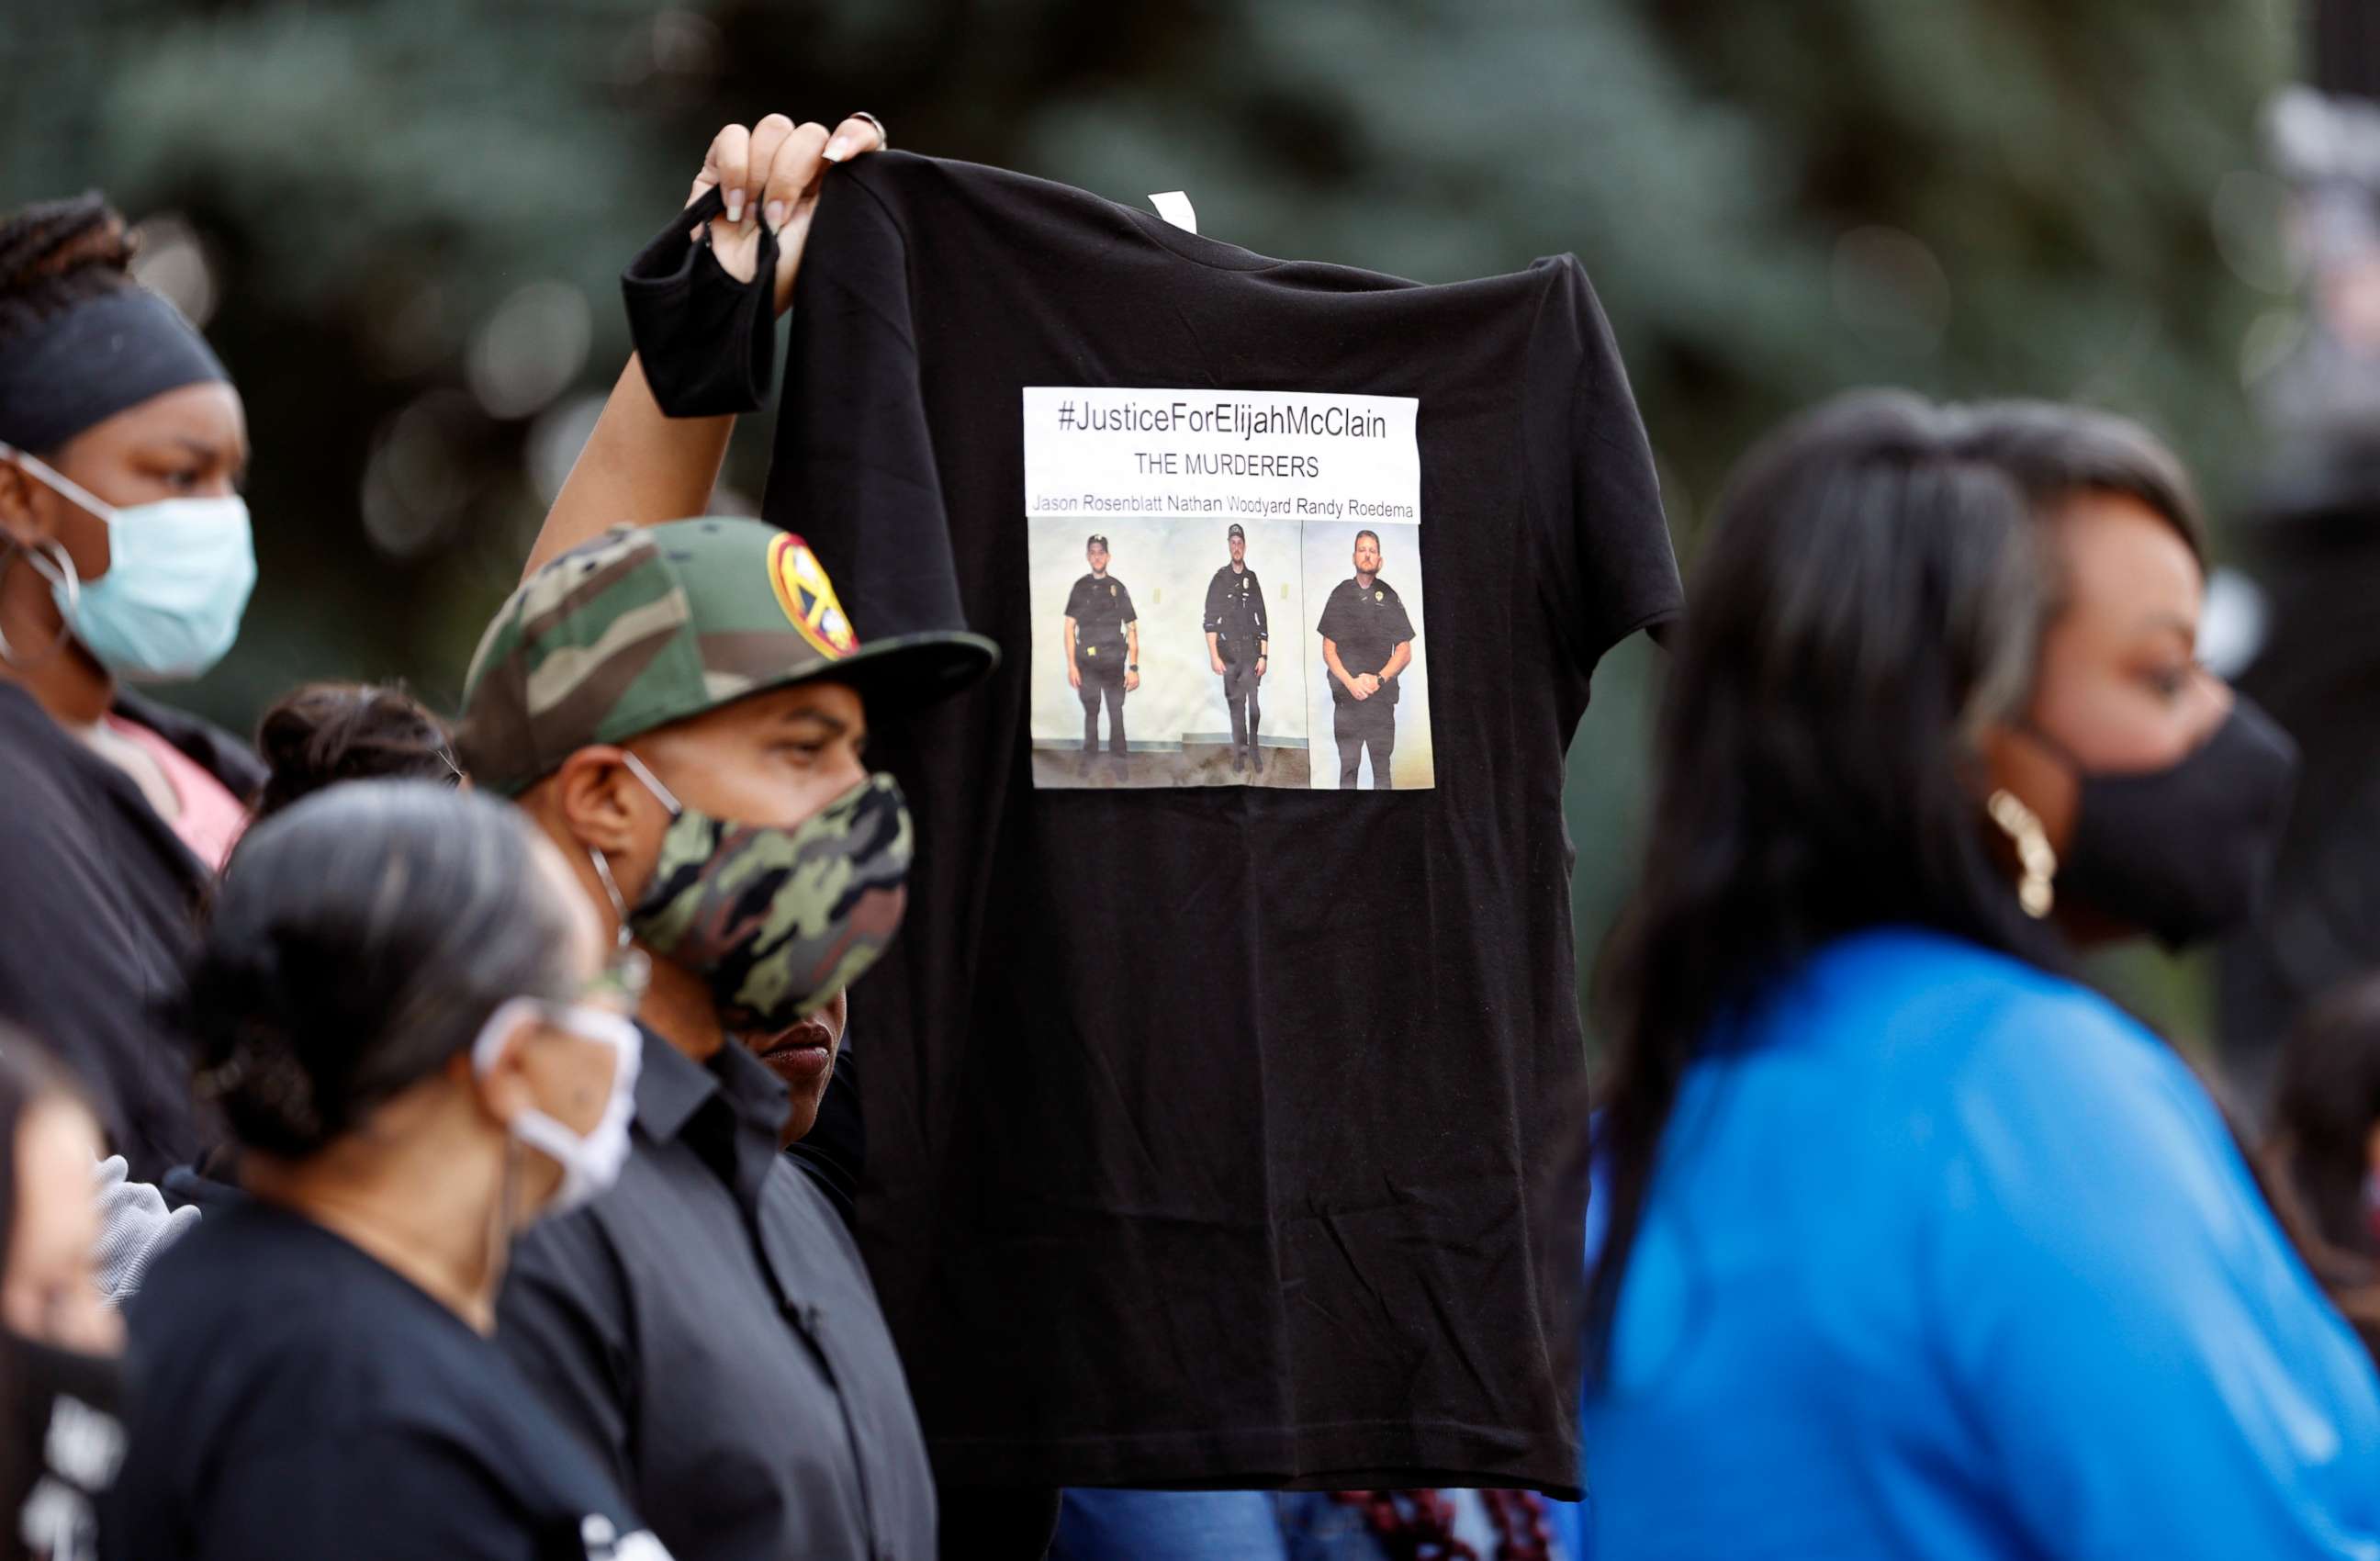 PHOTO: A supporter holds up a shirt to call attention to the death of Elijah McClain in August 2019 in Aurora, Colo., during a news conference after Gov. Jared Polis signed a broad police accountability bill Friday, June 19, 2020, in downtown Denver.